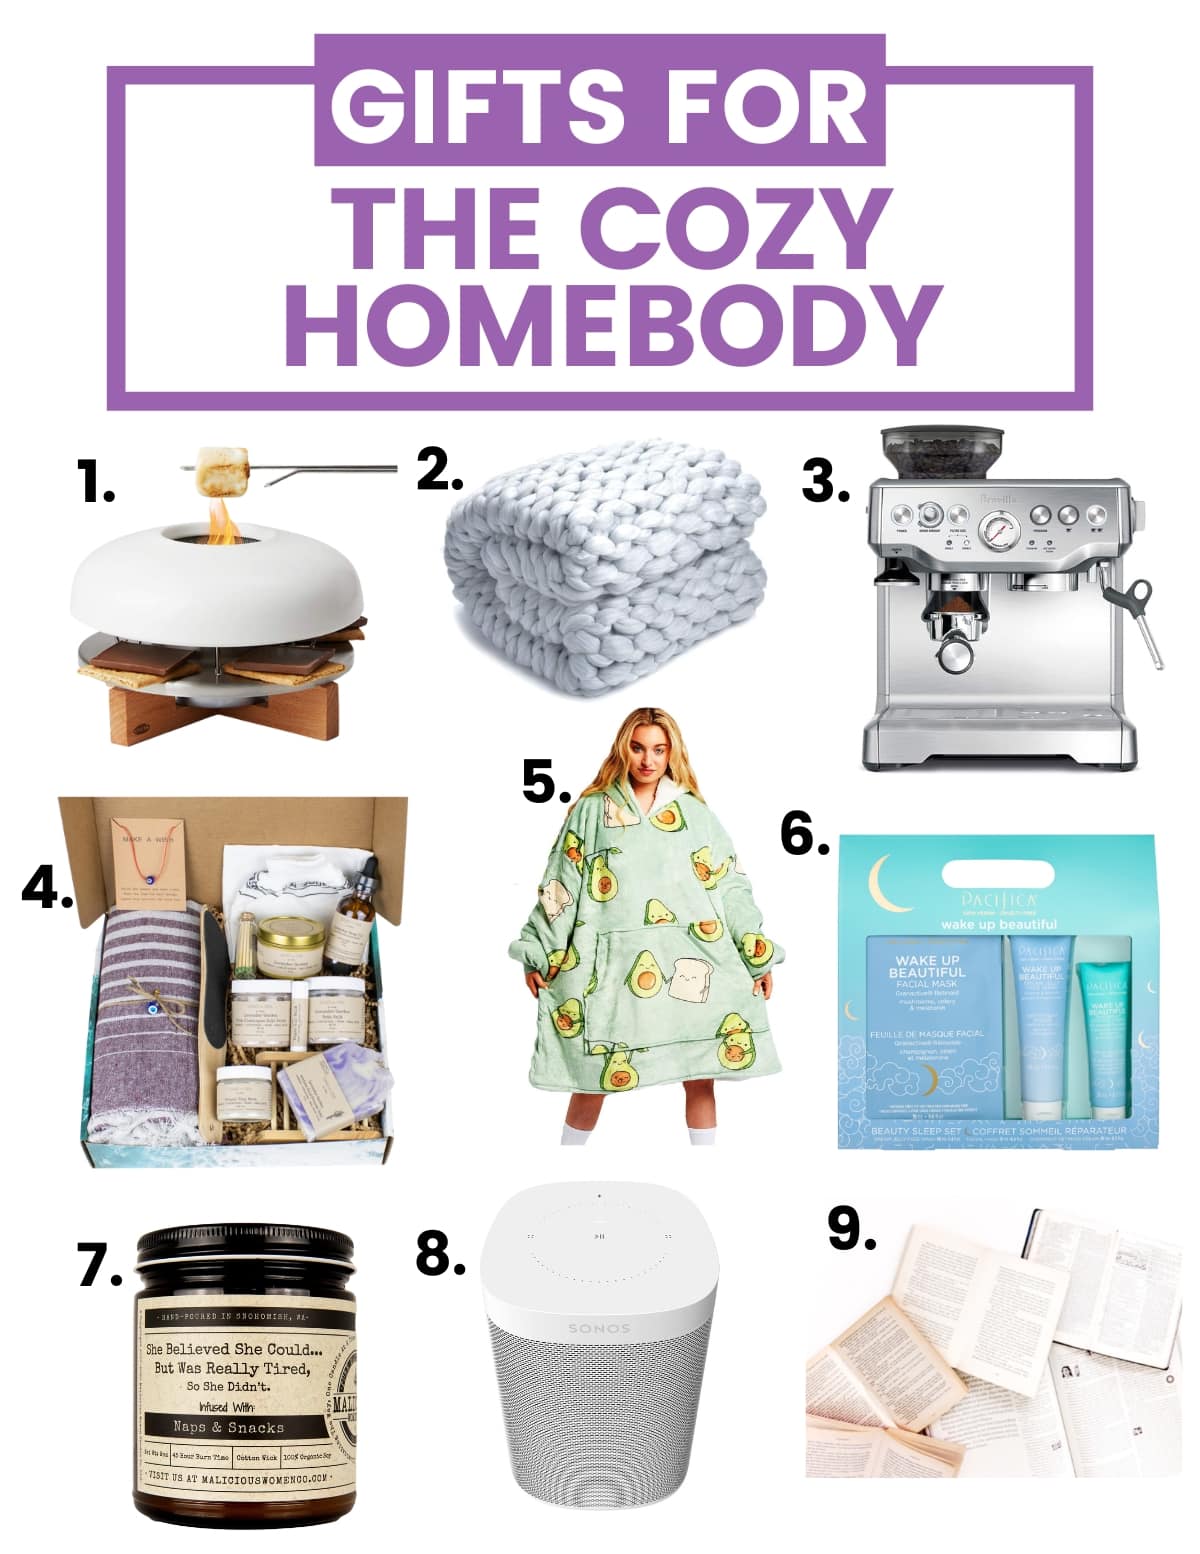 gifts for the zoy homebody